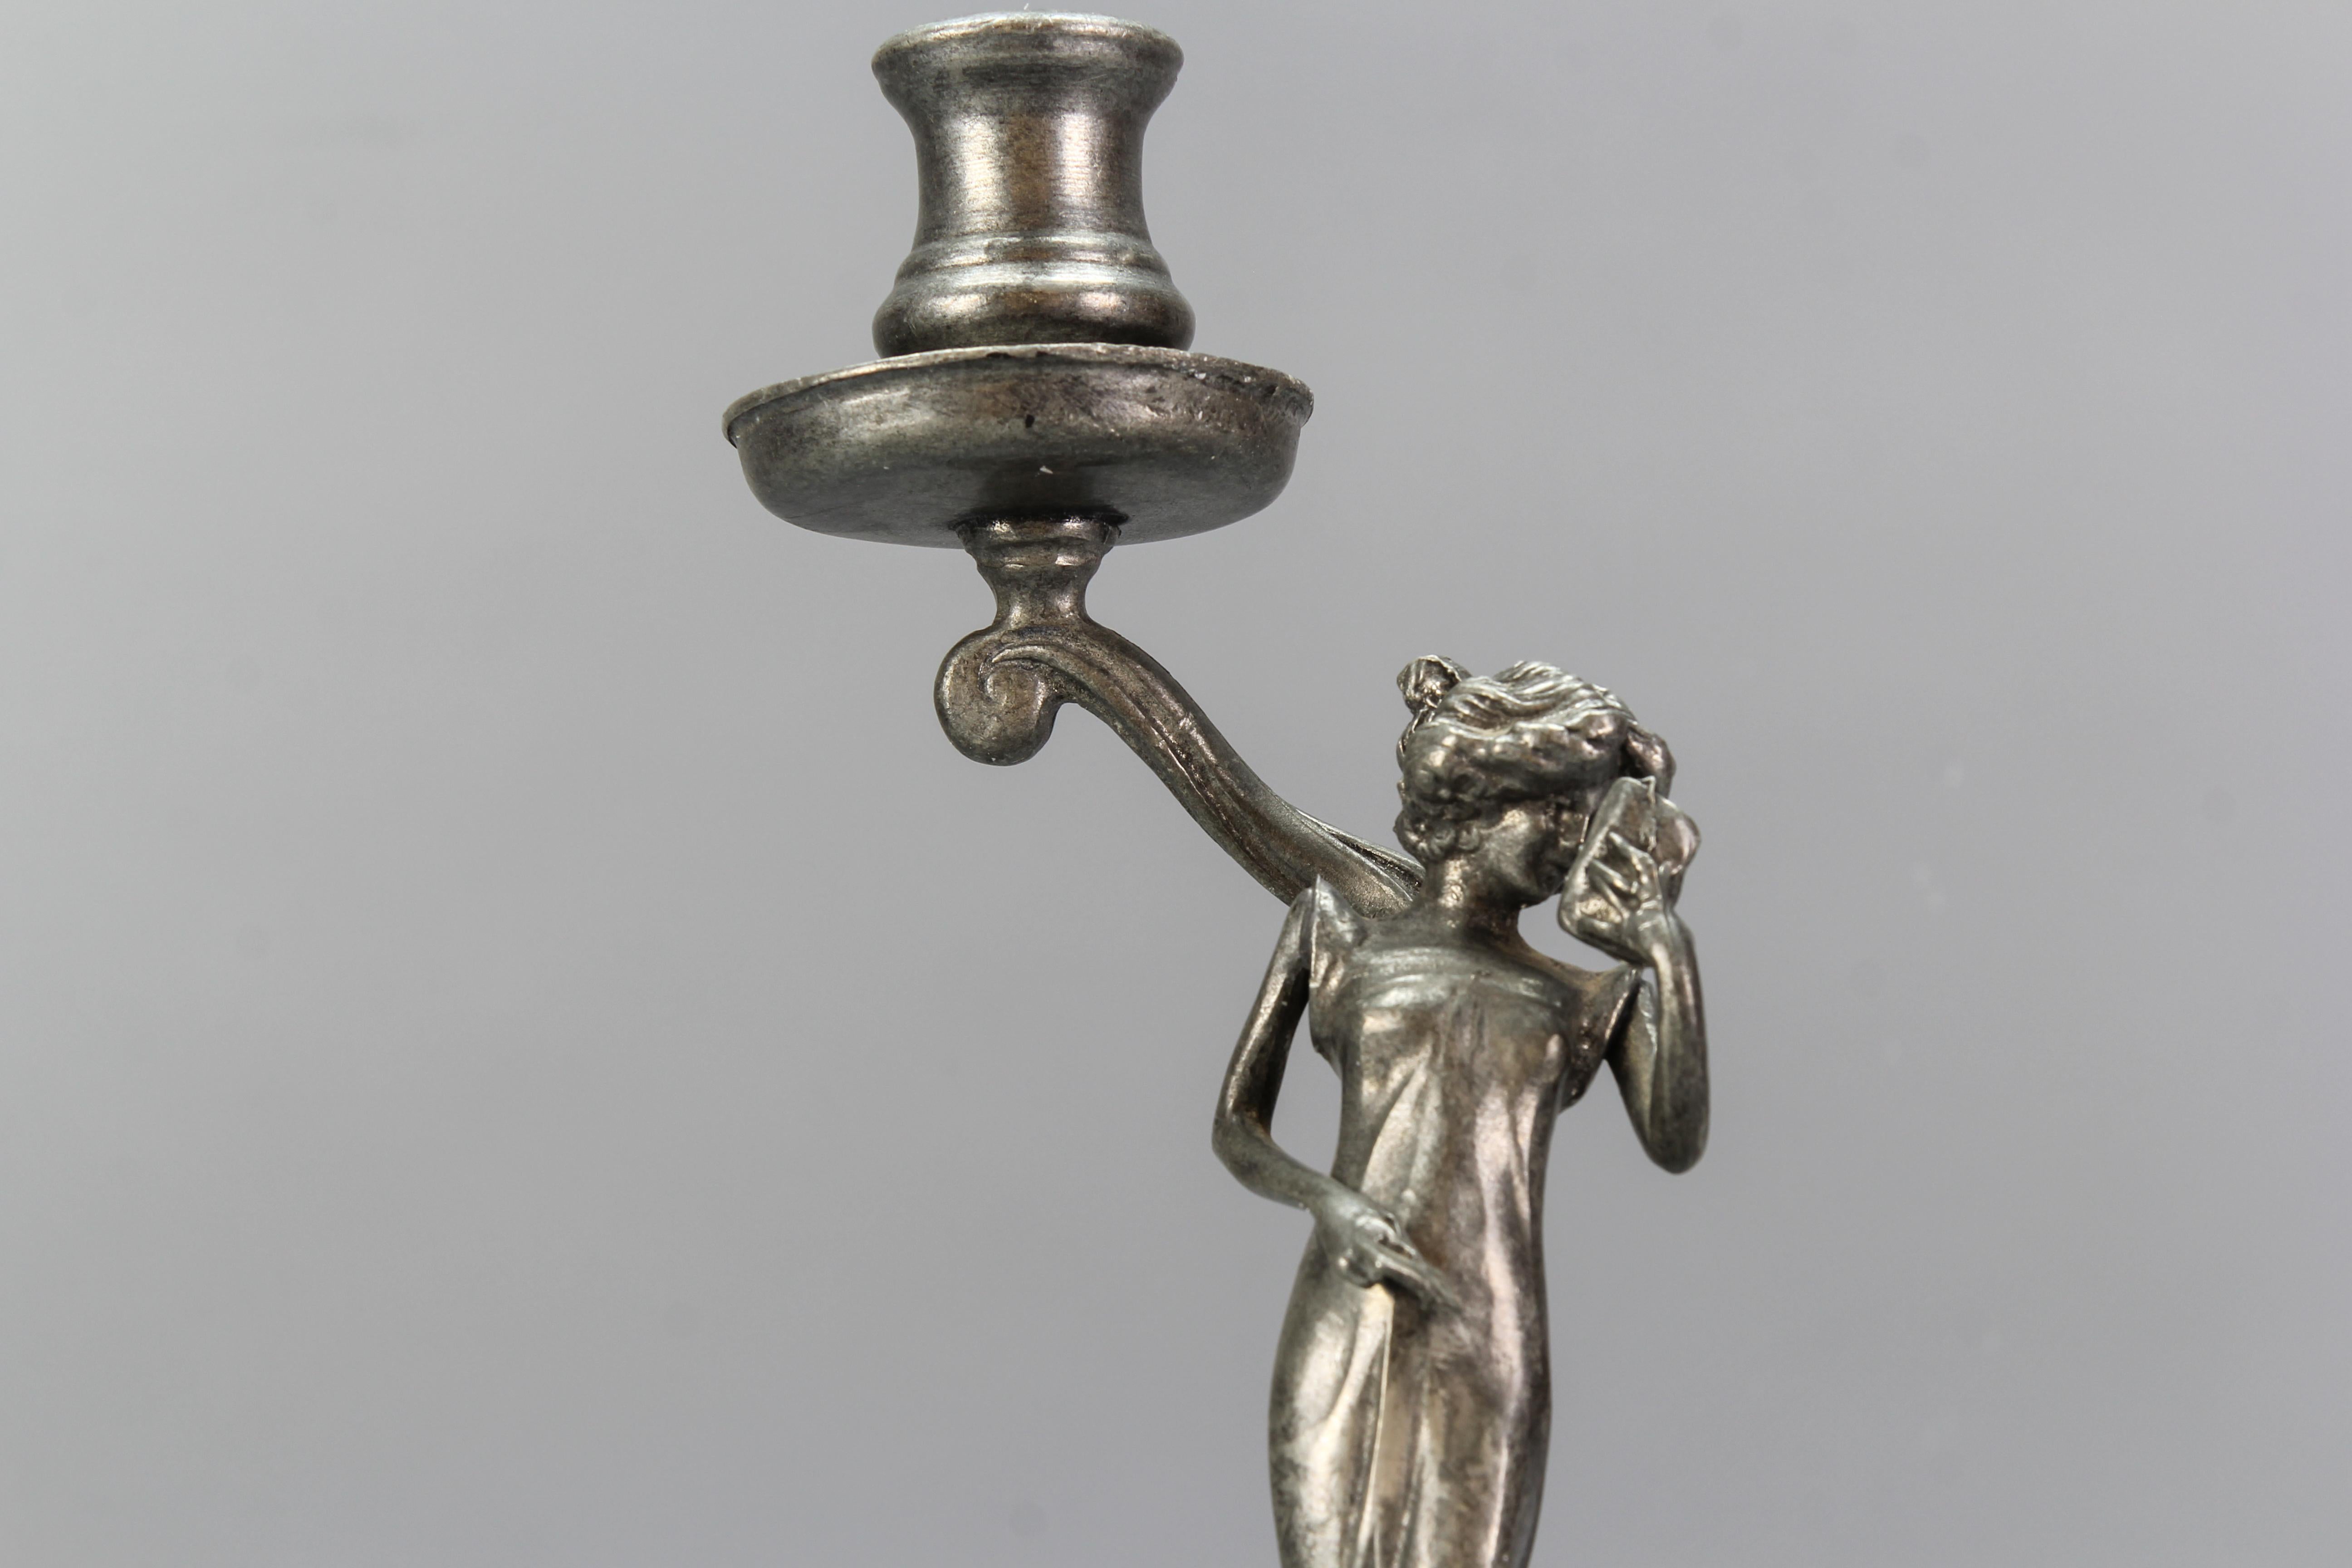 French Art Nouveau Pewter Candlestick with a Lady Sculpture, ca. 1920 For Sale 1